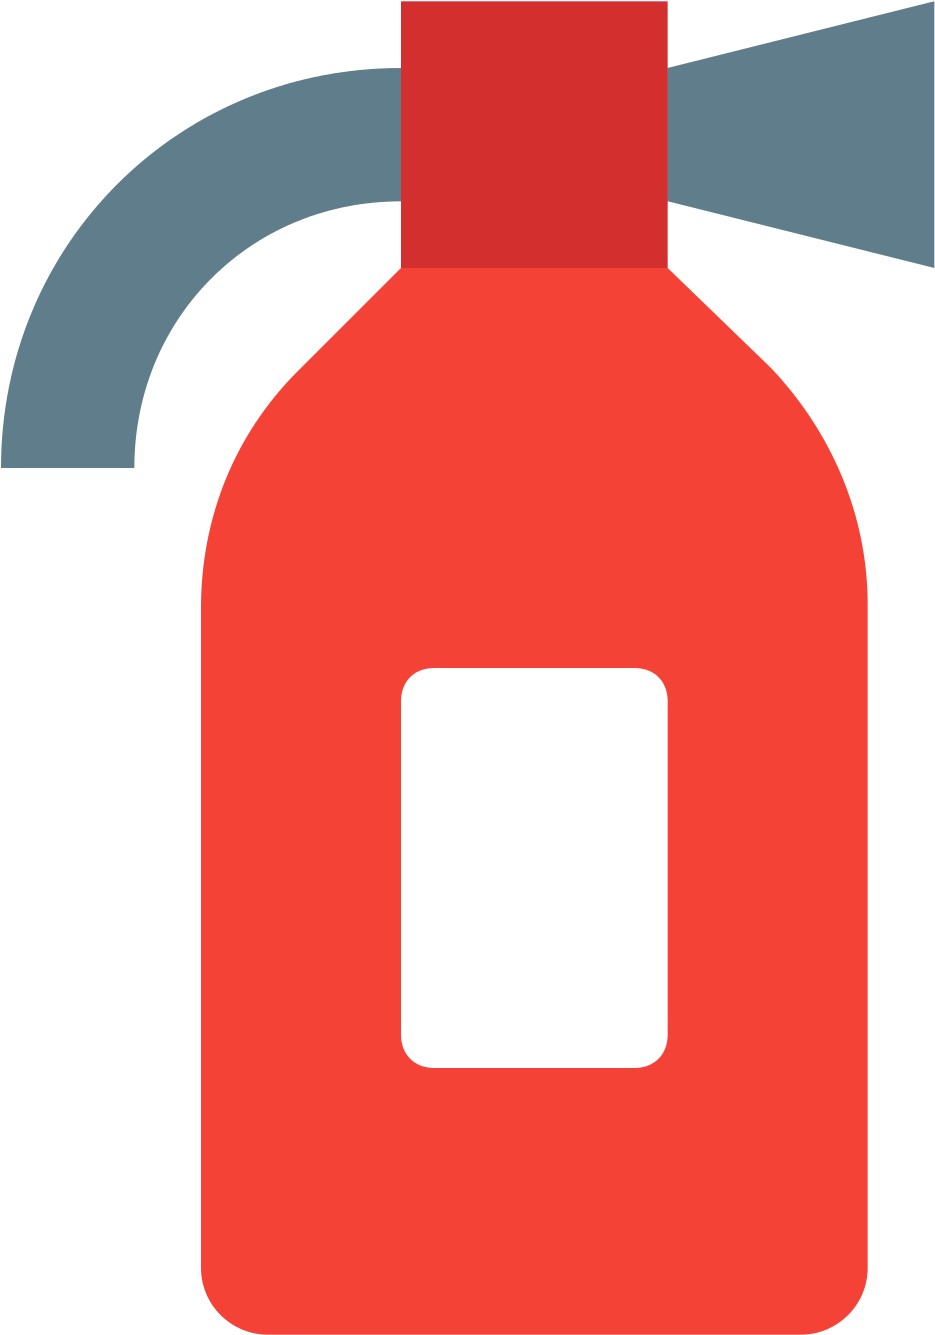 It Is An Icon Of A Fire Extinguisher - Fire Extinguisher Png Icon (1600x1600)